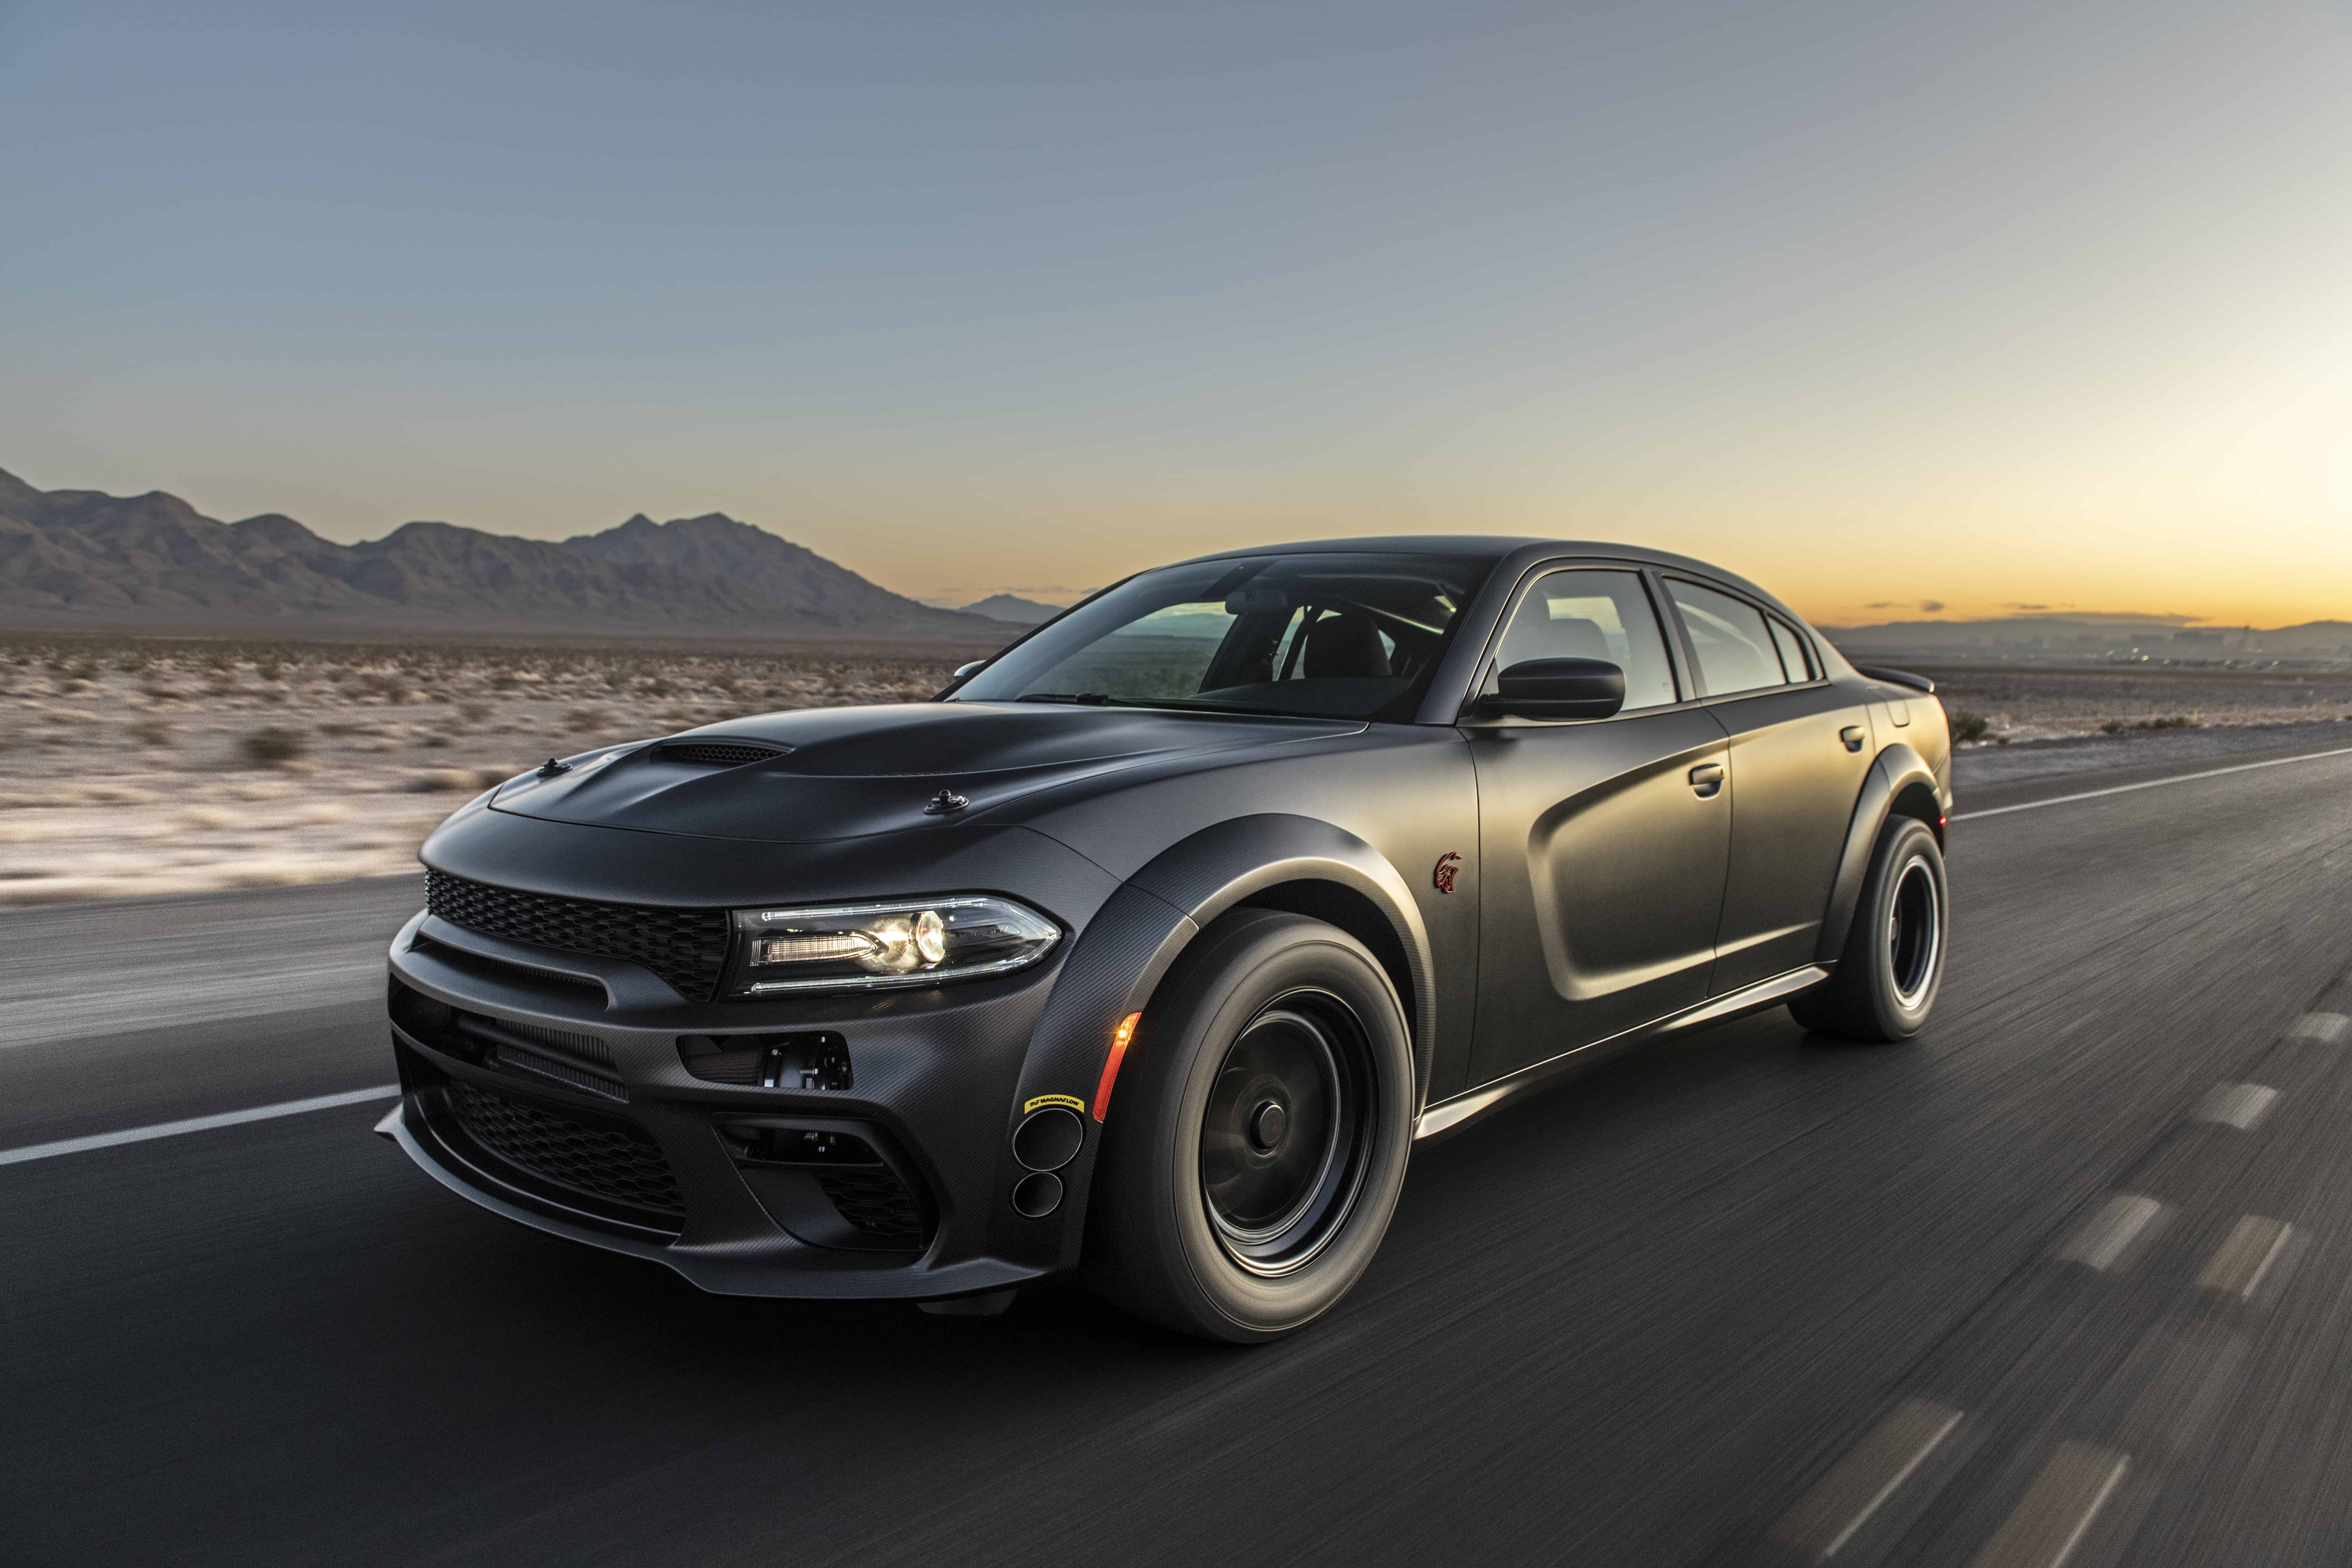 SpeedKore unveield AWD twin-turbocharged Dodge Charger at SEMA 2019